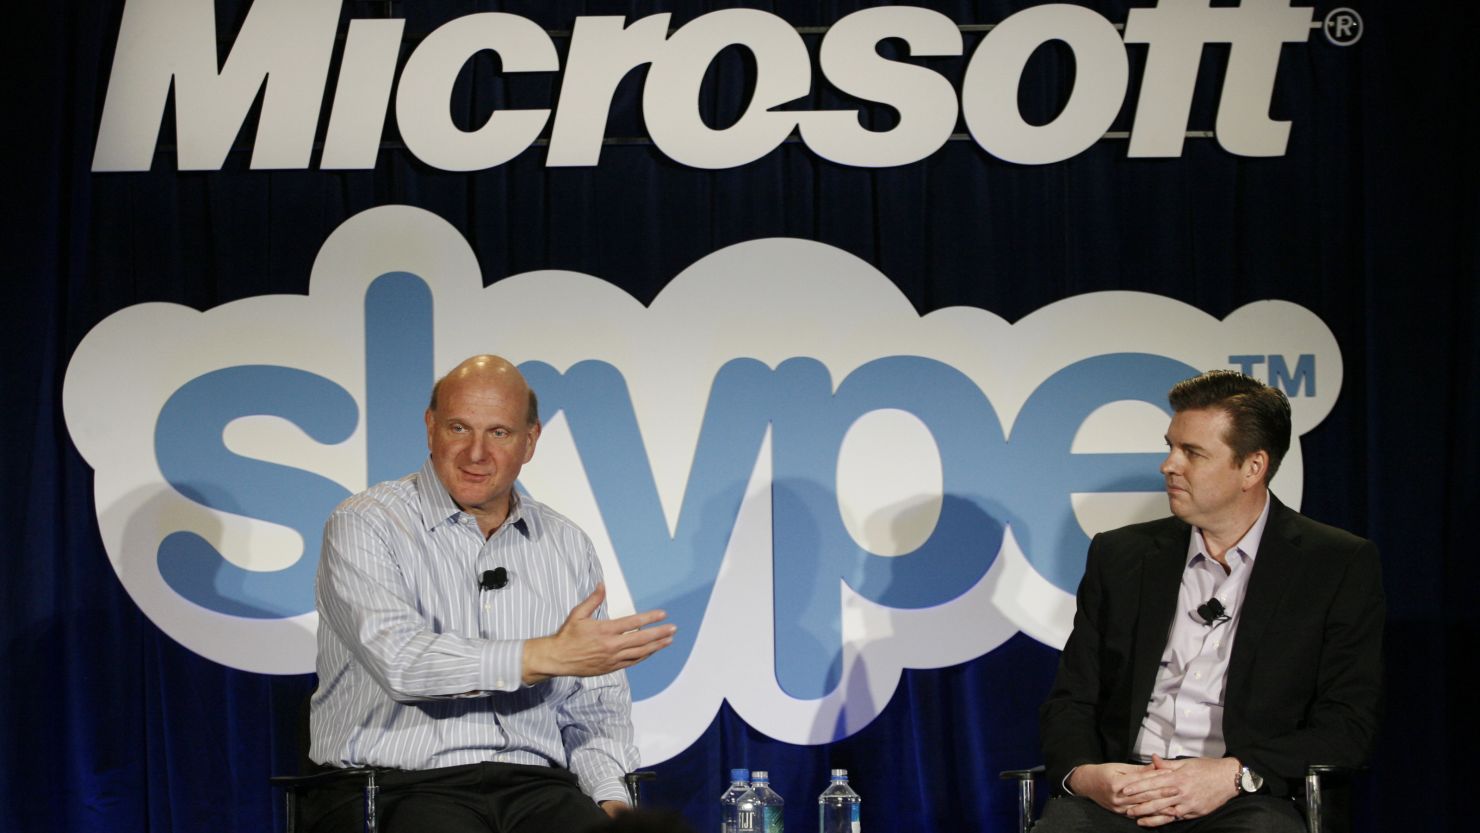 Microsoft CEO Steve Ballmer and Skype CEO Tony Bates at a press conference in 2011.